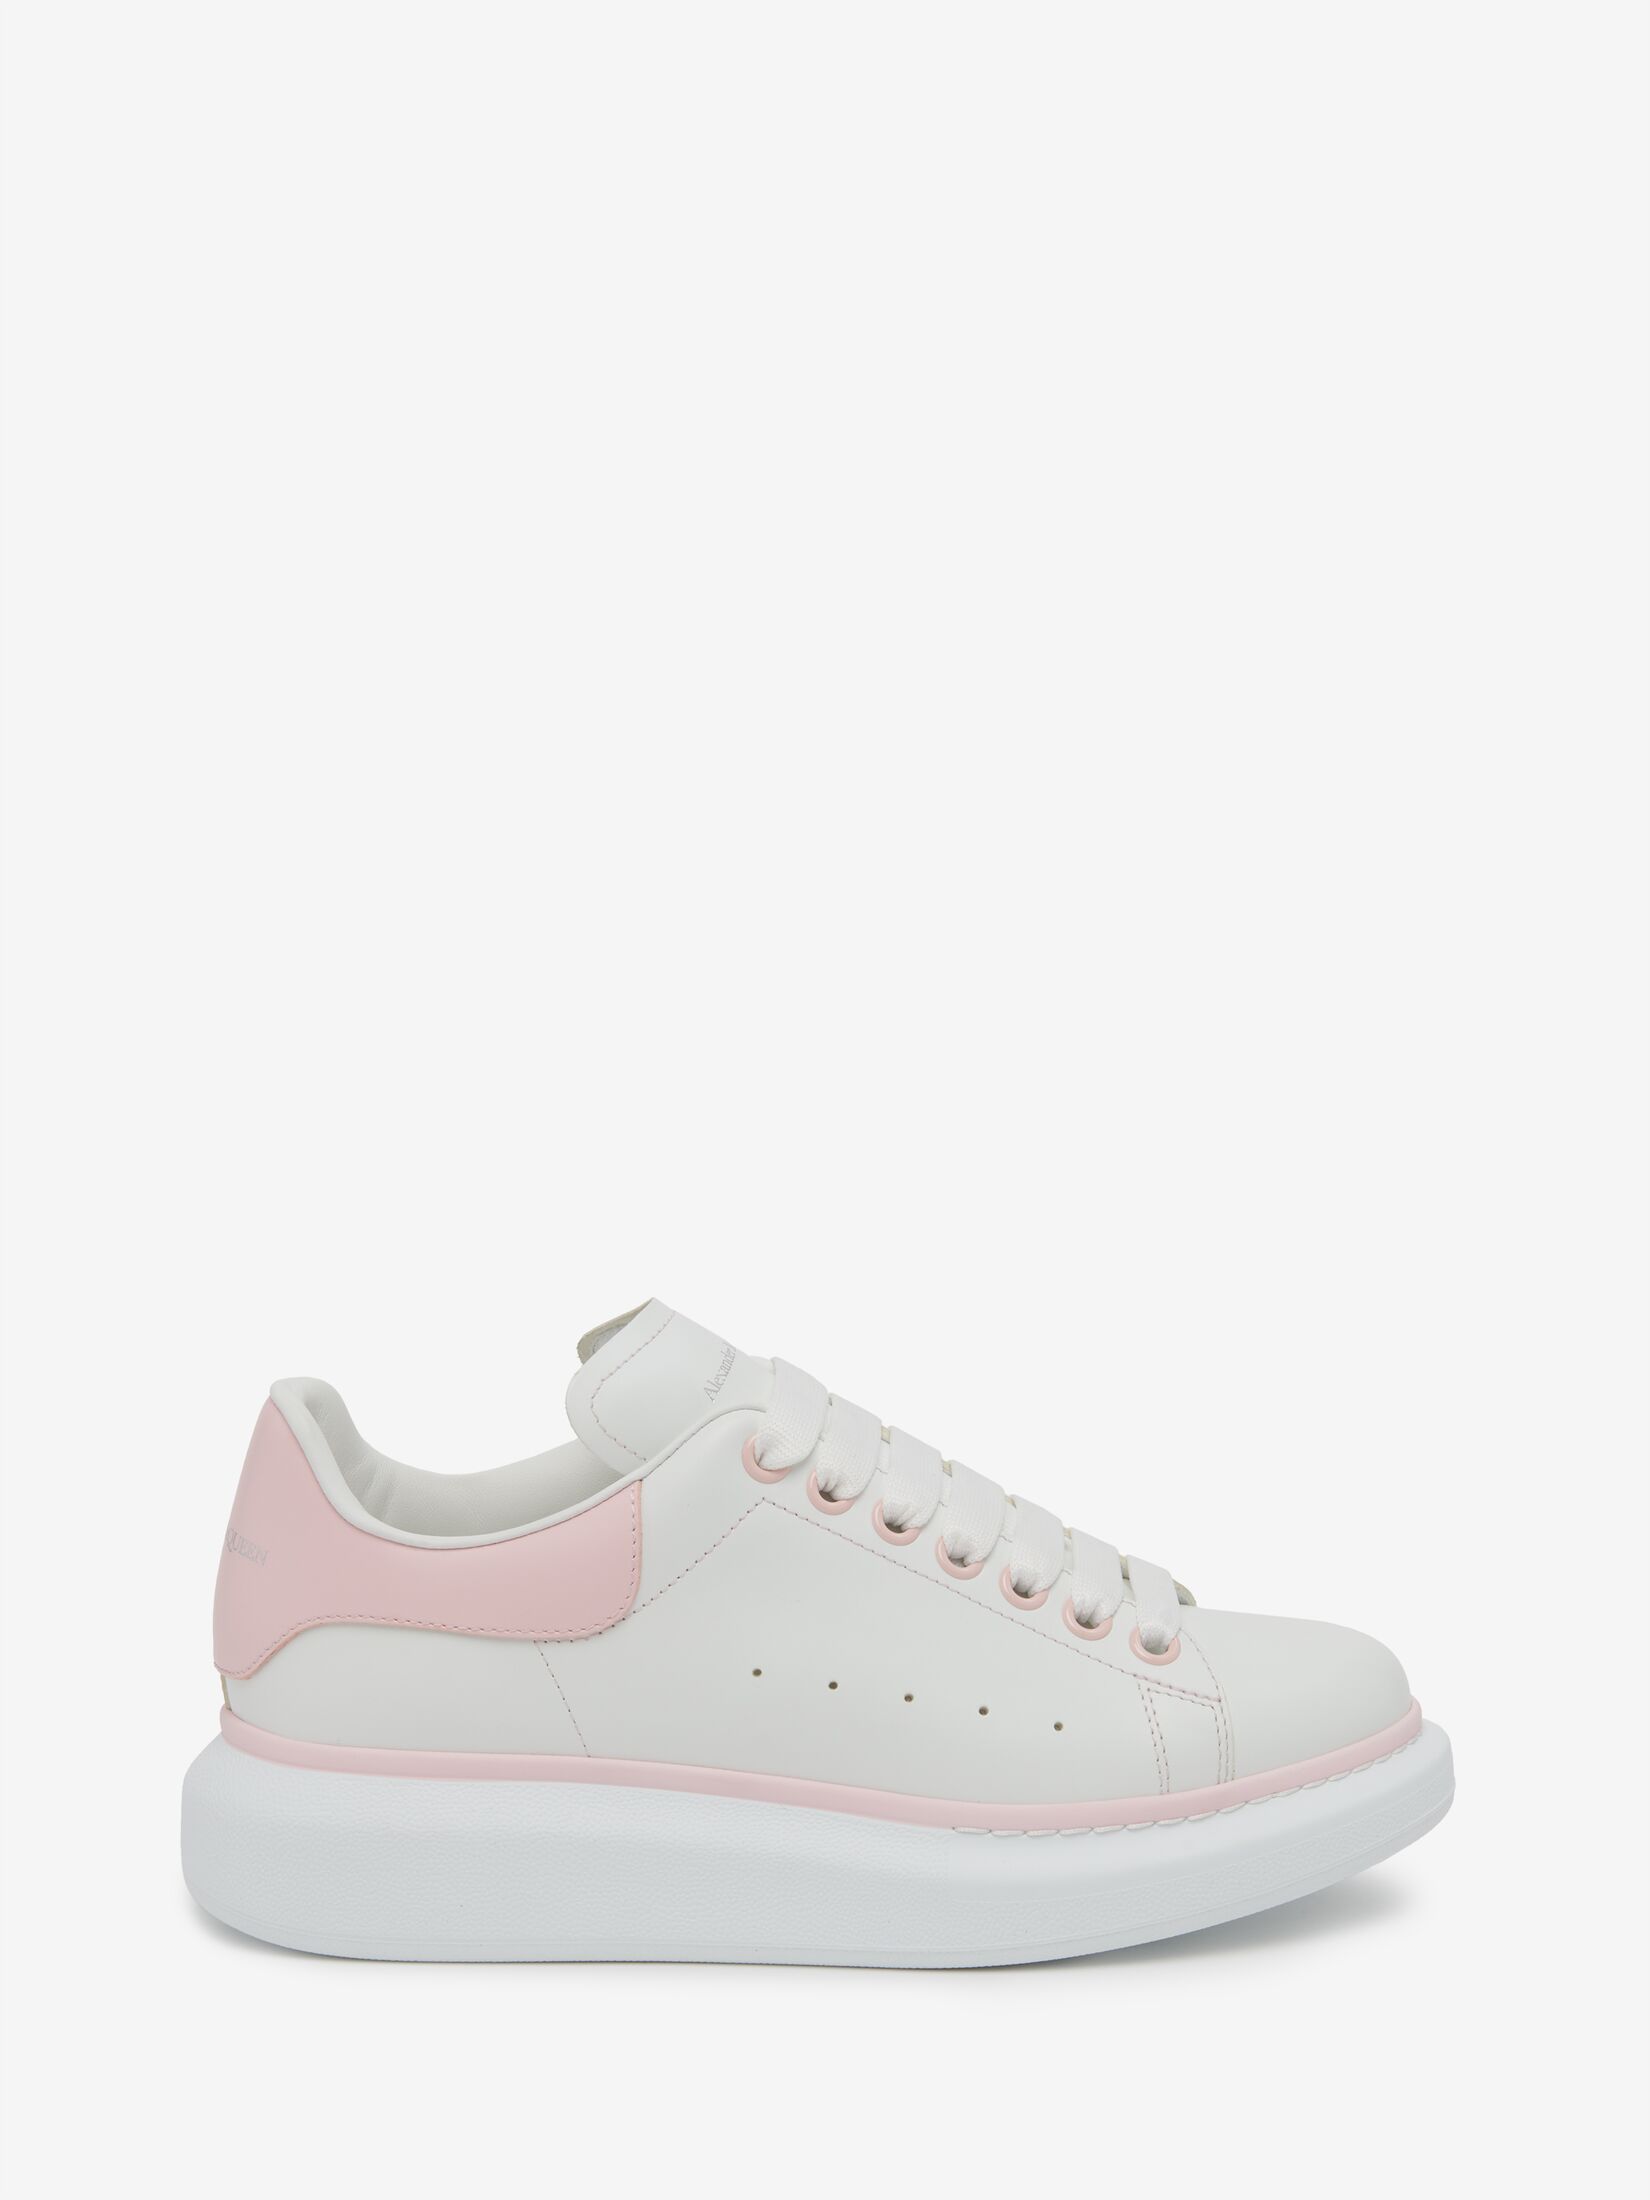 White Oversized Sneakers With Lust Red Suede Spoiler - ALEXANDER MCQUEEN -  Russocapri